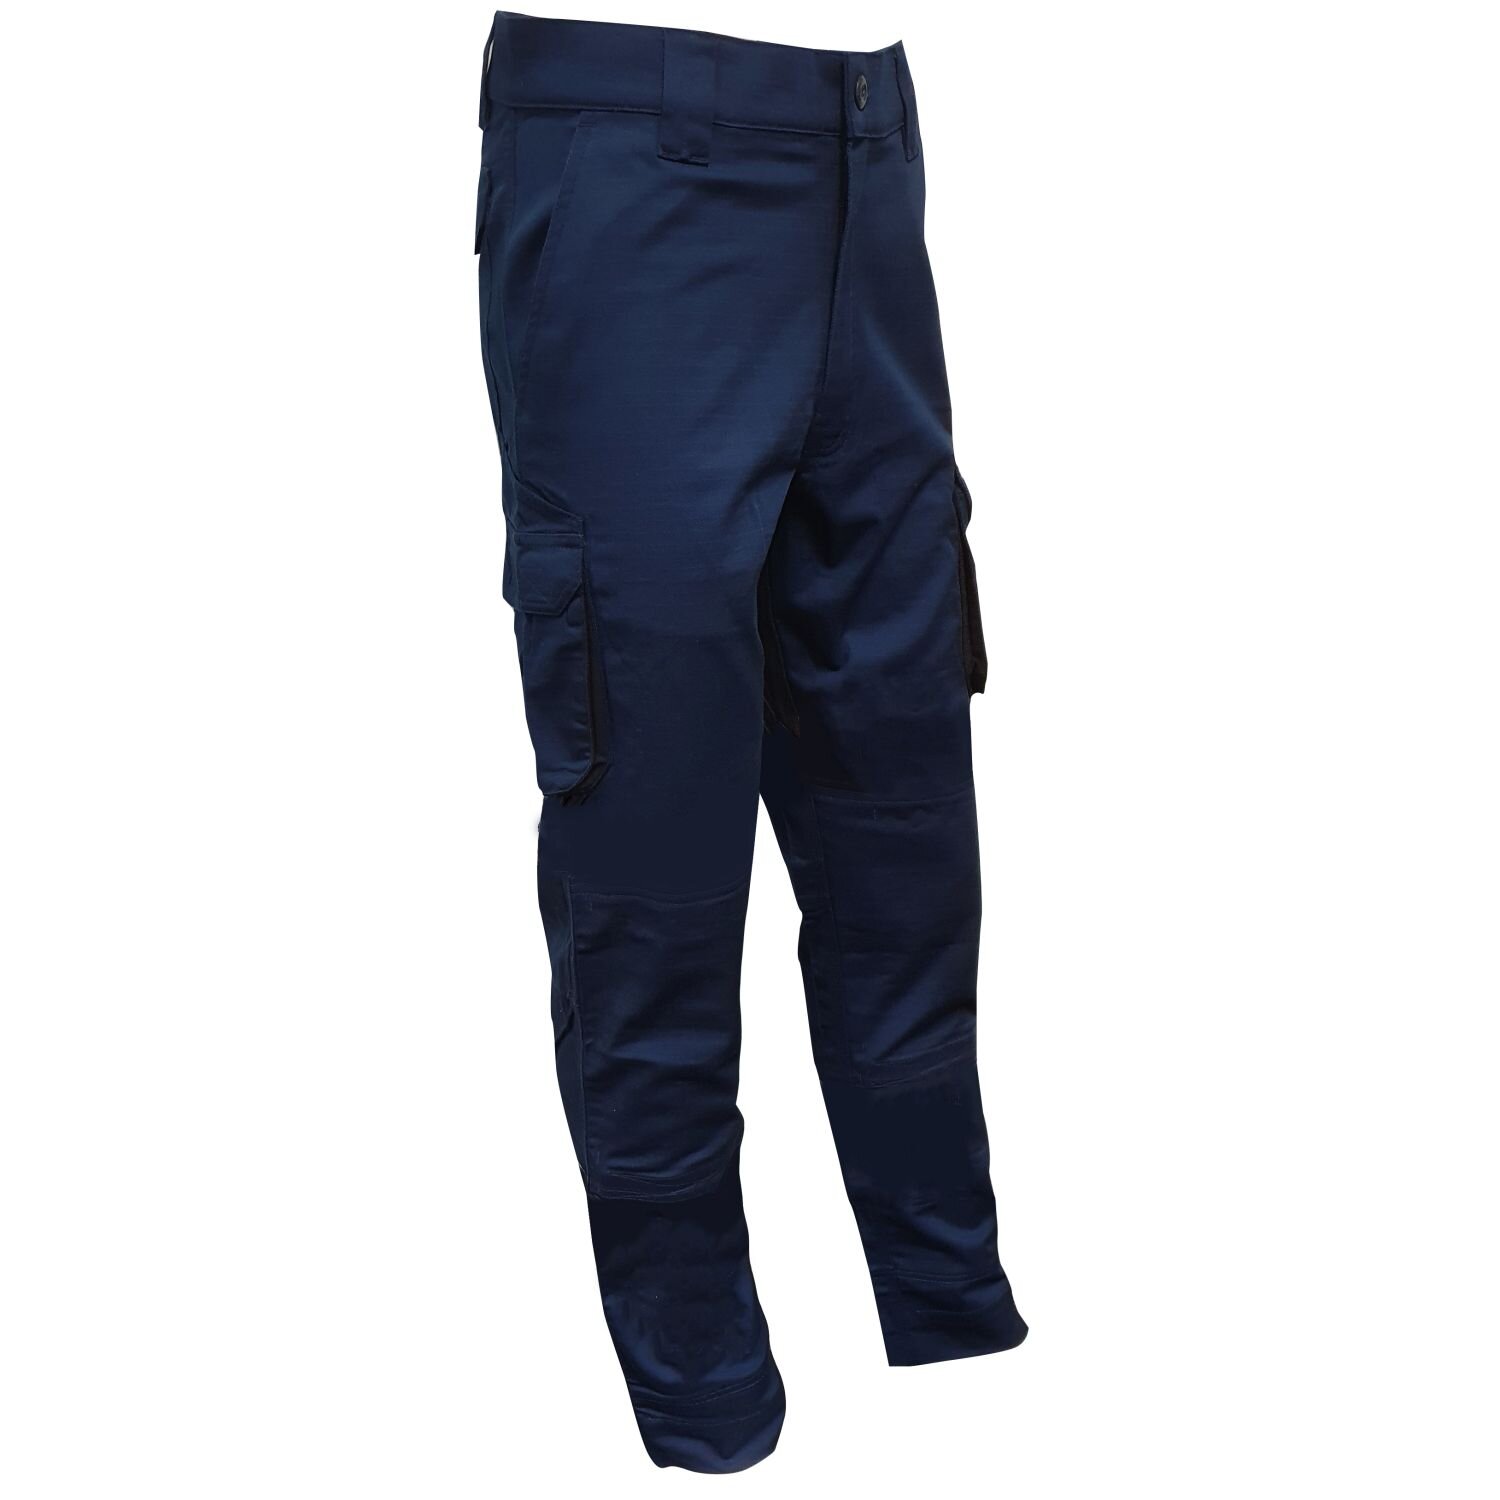 Techni Vision Lightweight Stretch Ripstop Vented 220gsm Cargo Trouser with 4 Way Stretch Panel